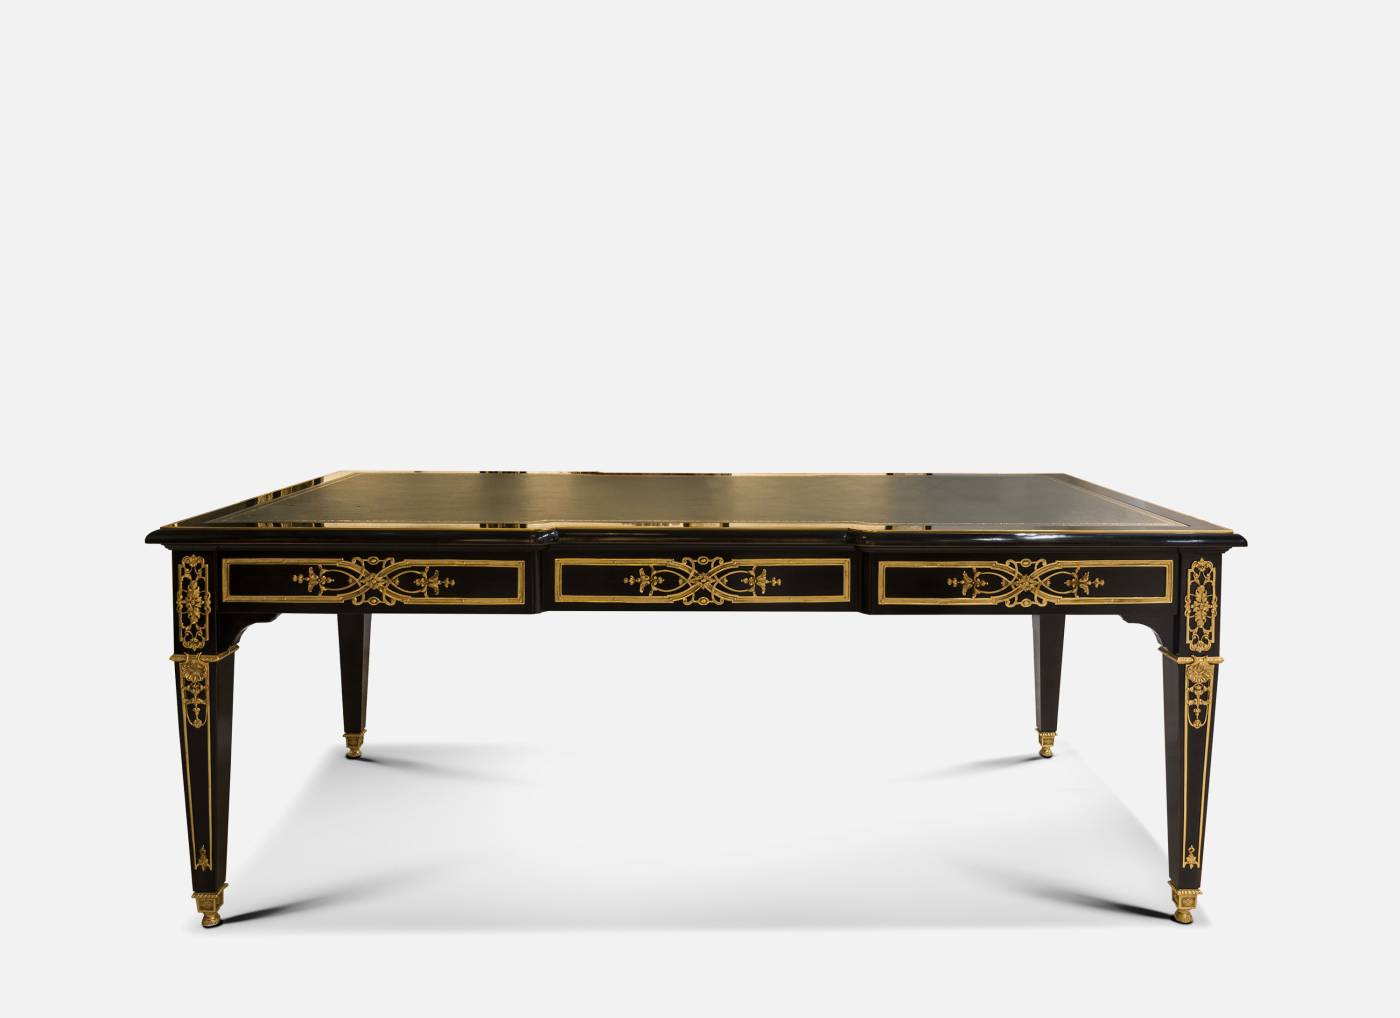 ART.1045-19 – Discover the elegance of luxury classic Desks and writing desks made in Italy by C.G. Capelletti. Luxury classic furniture that combines style and craftsmanship.